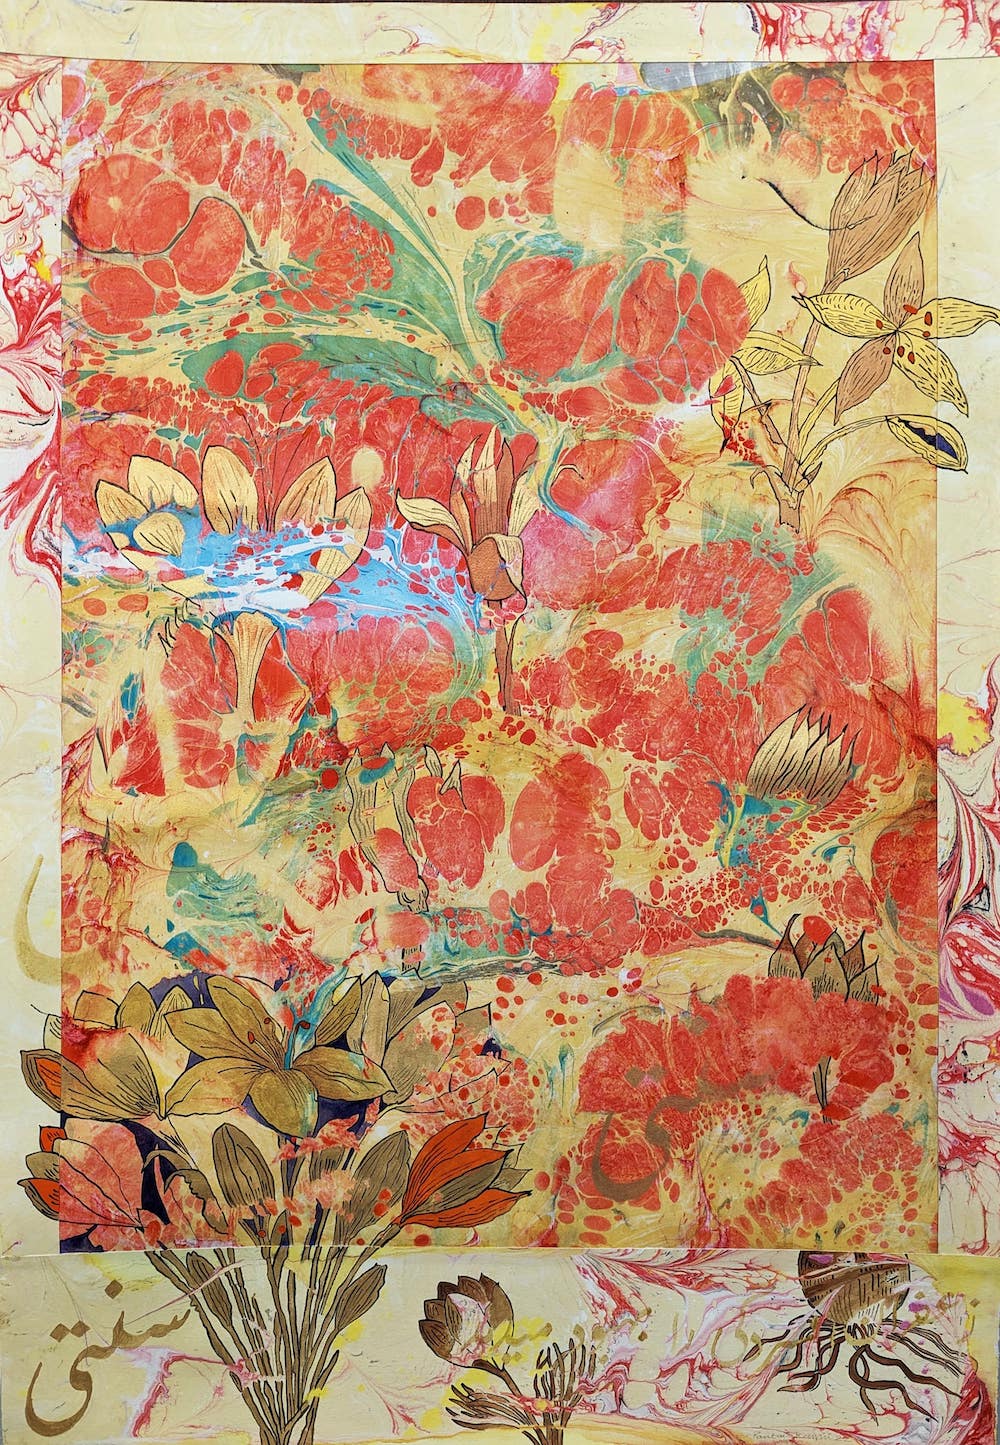 marbleized painting of flowers and plants